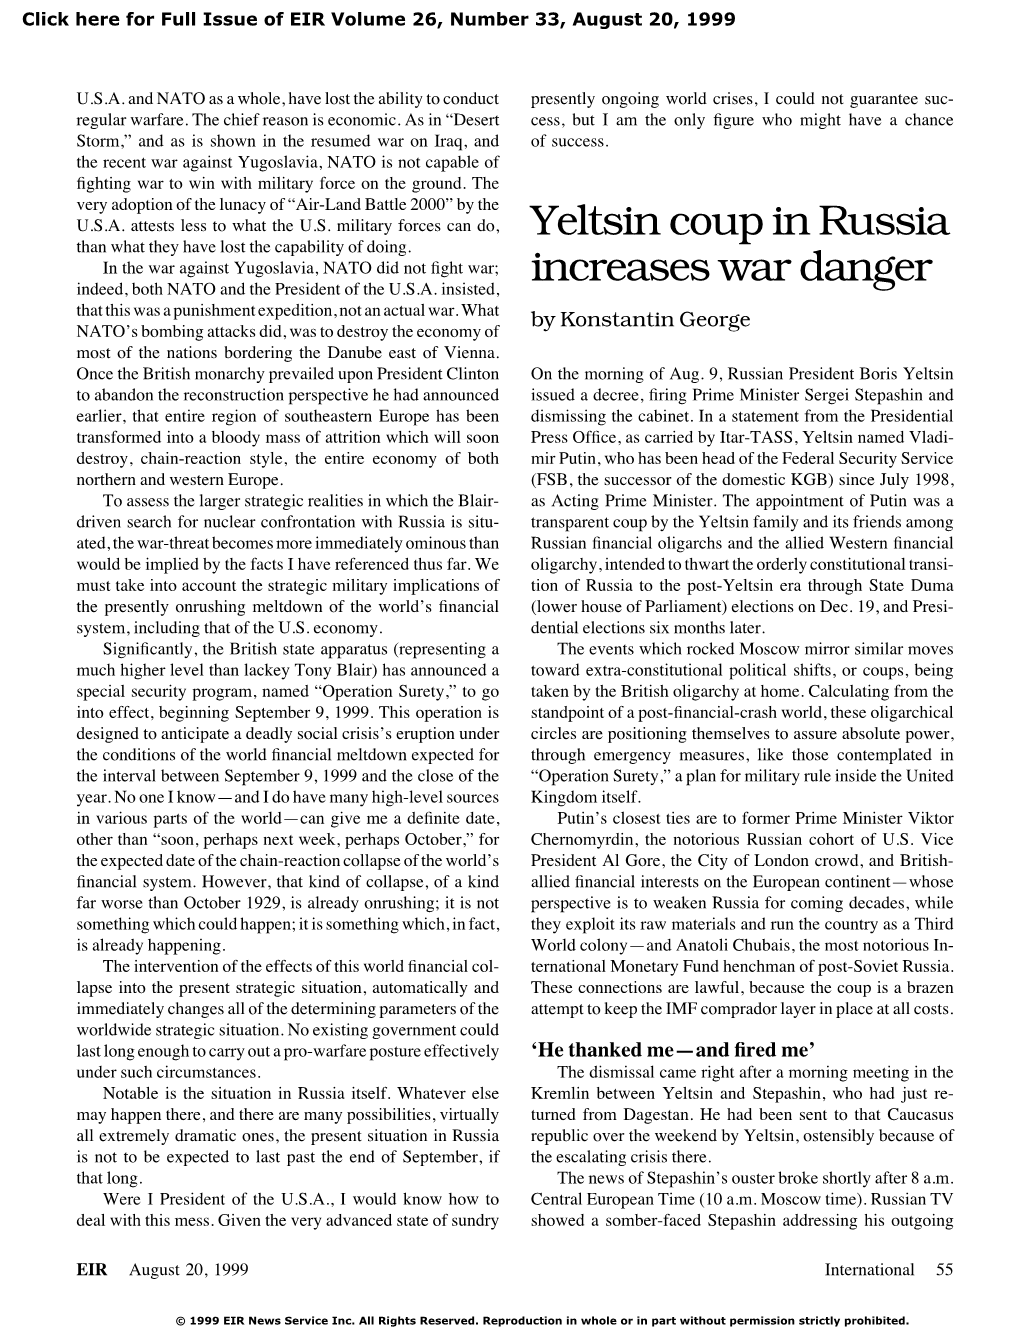 Yeltsin Coup in Russia Increases War Danger